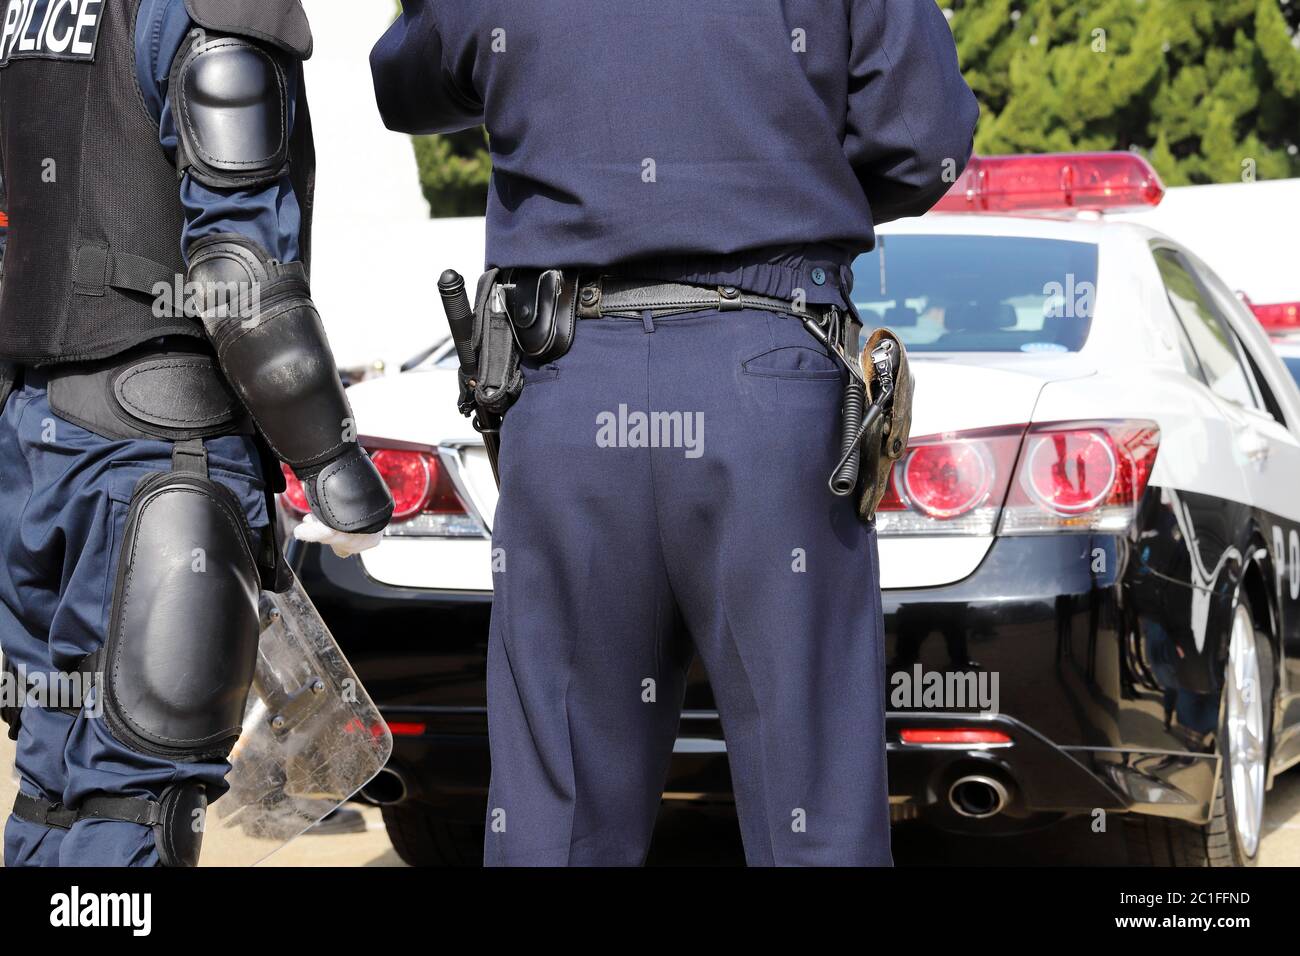 Back view of Japanese police officers with patrol car Stock Photo